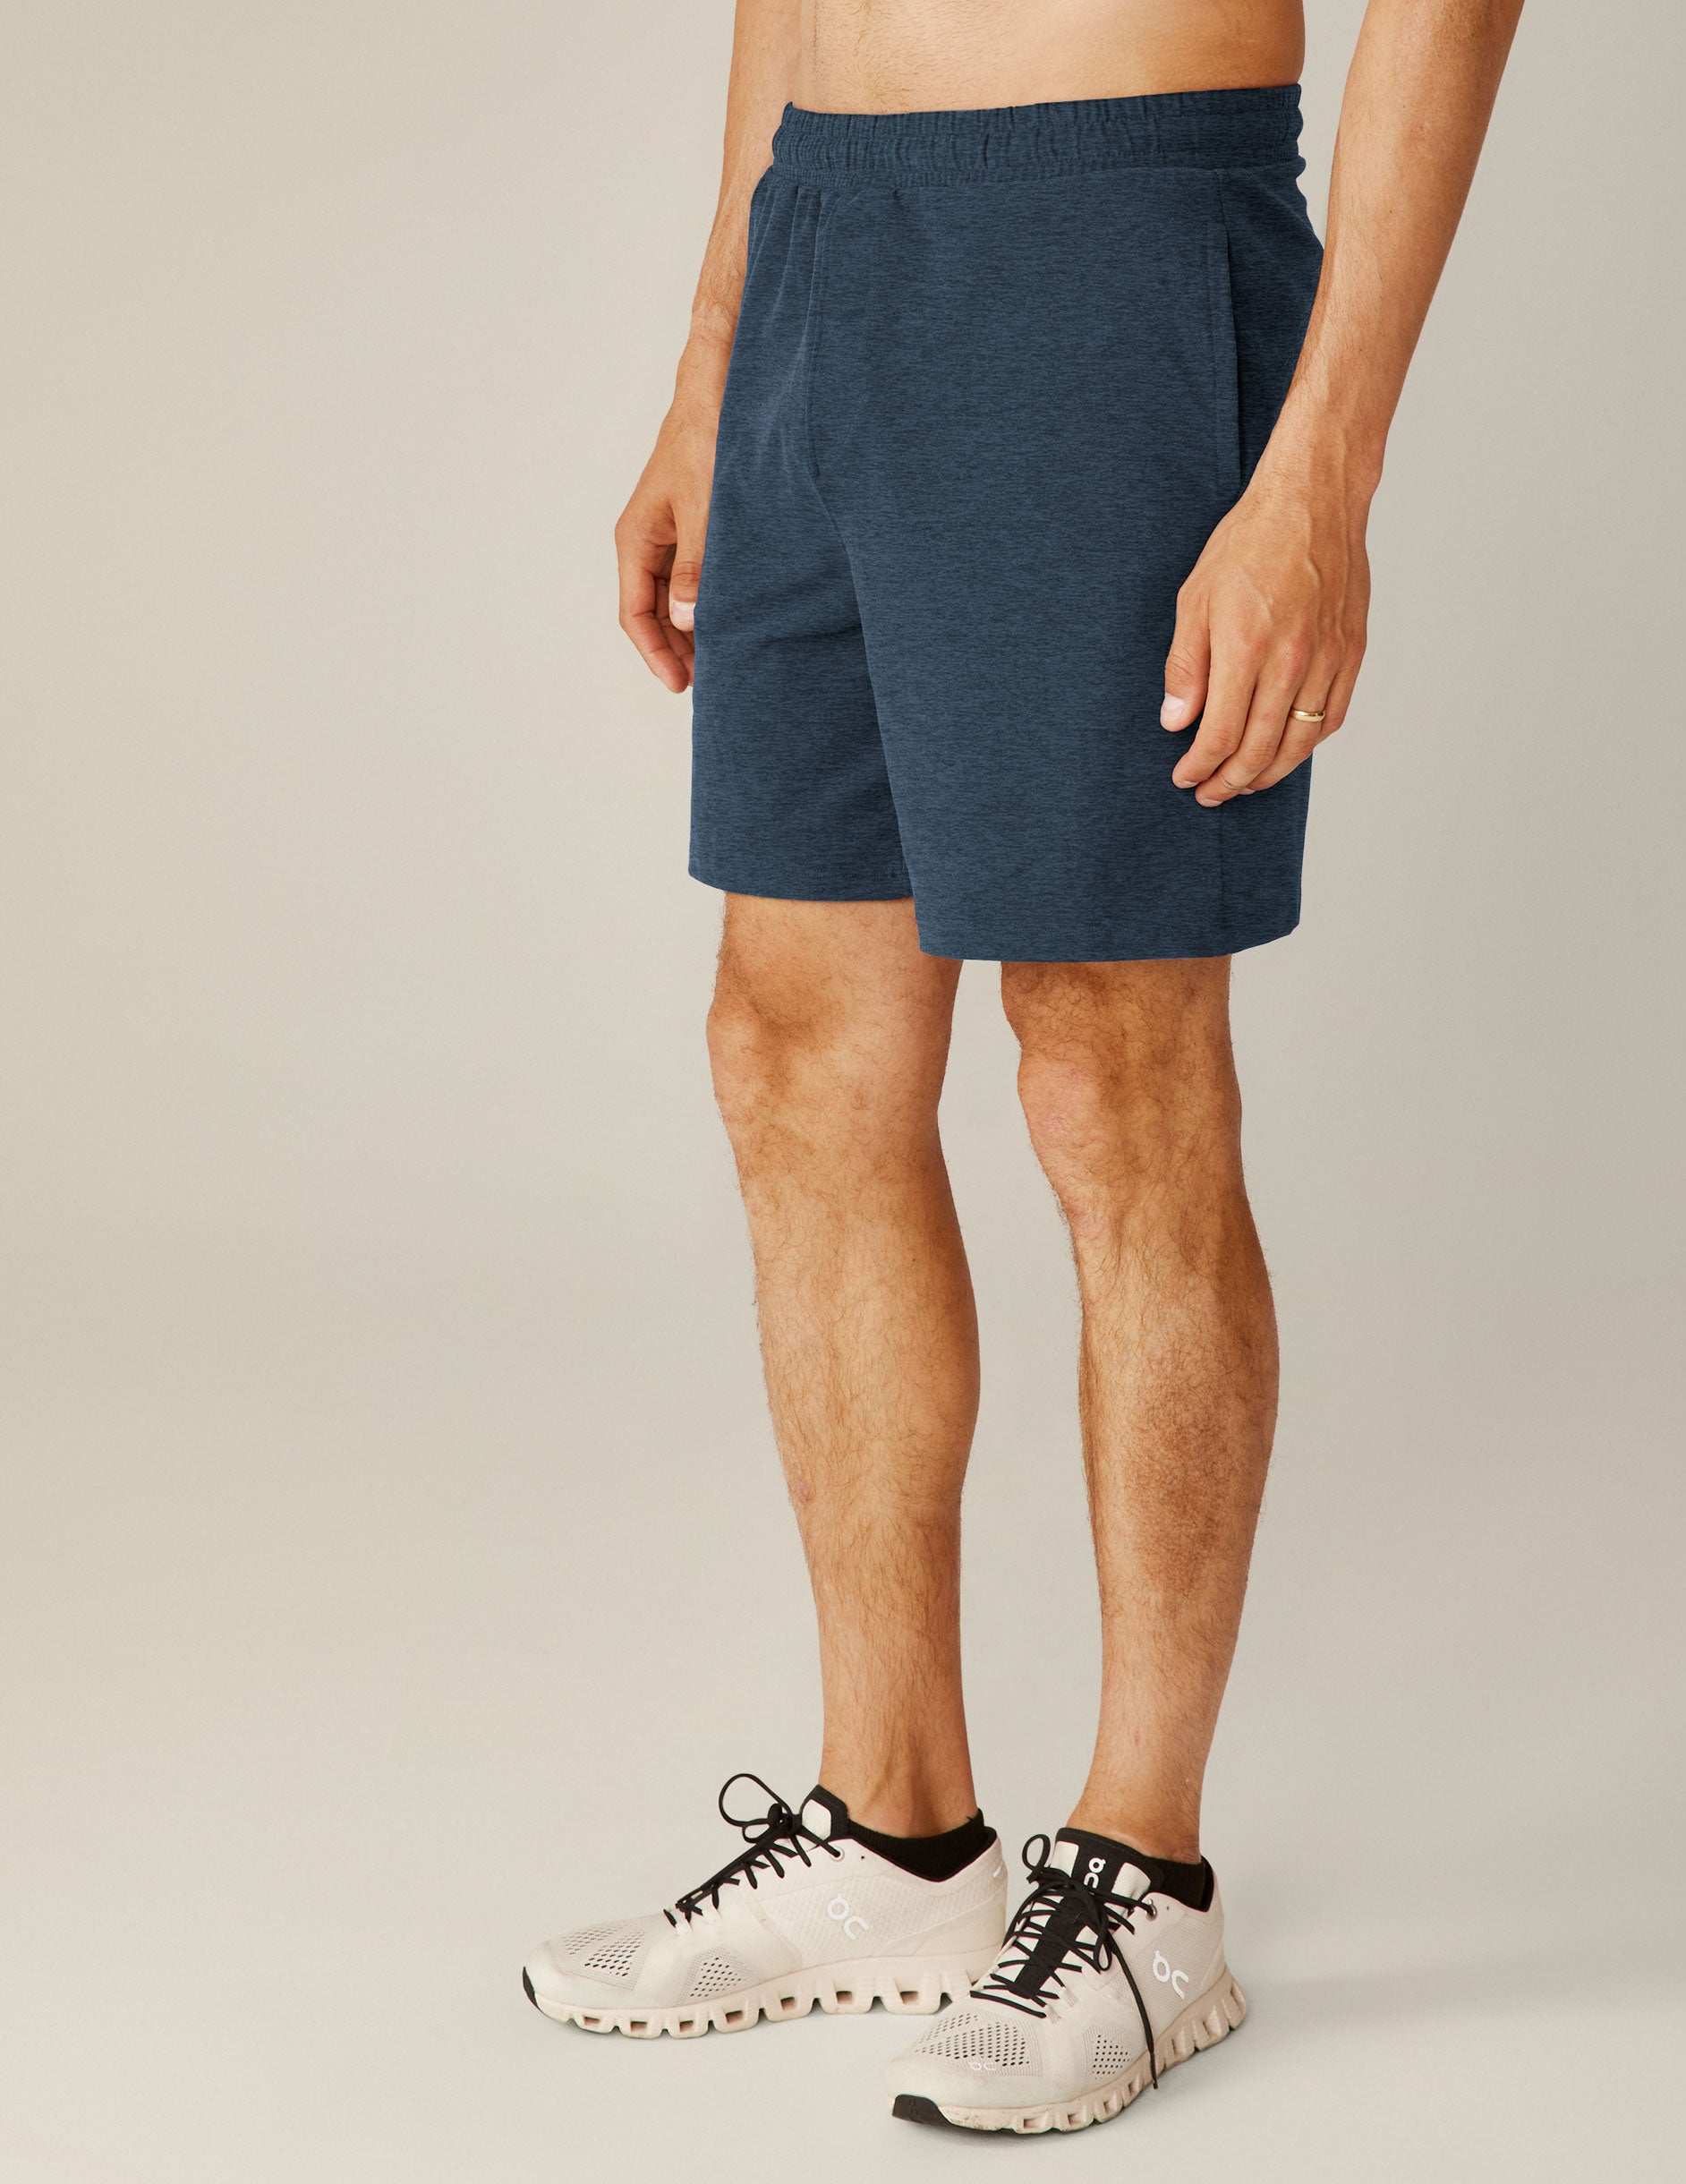 blue relaxed fit men's athleisure shorts with pockets. 